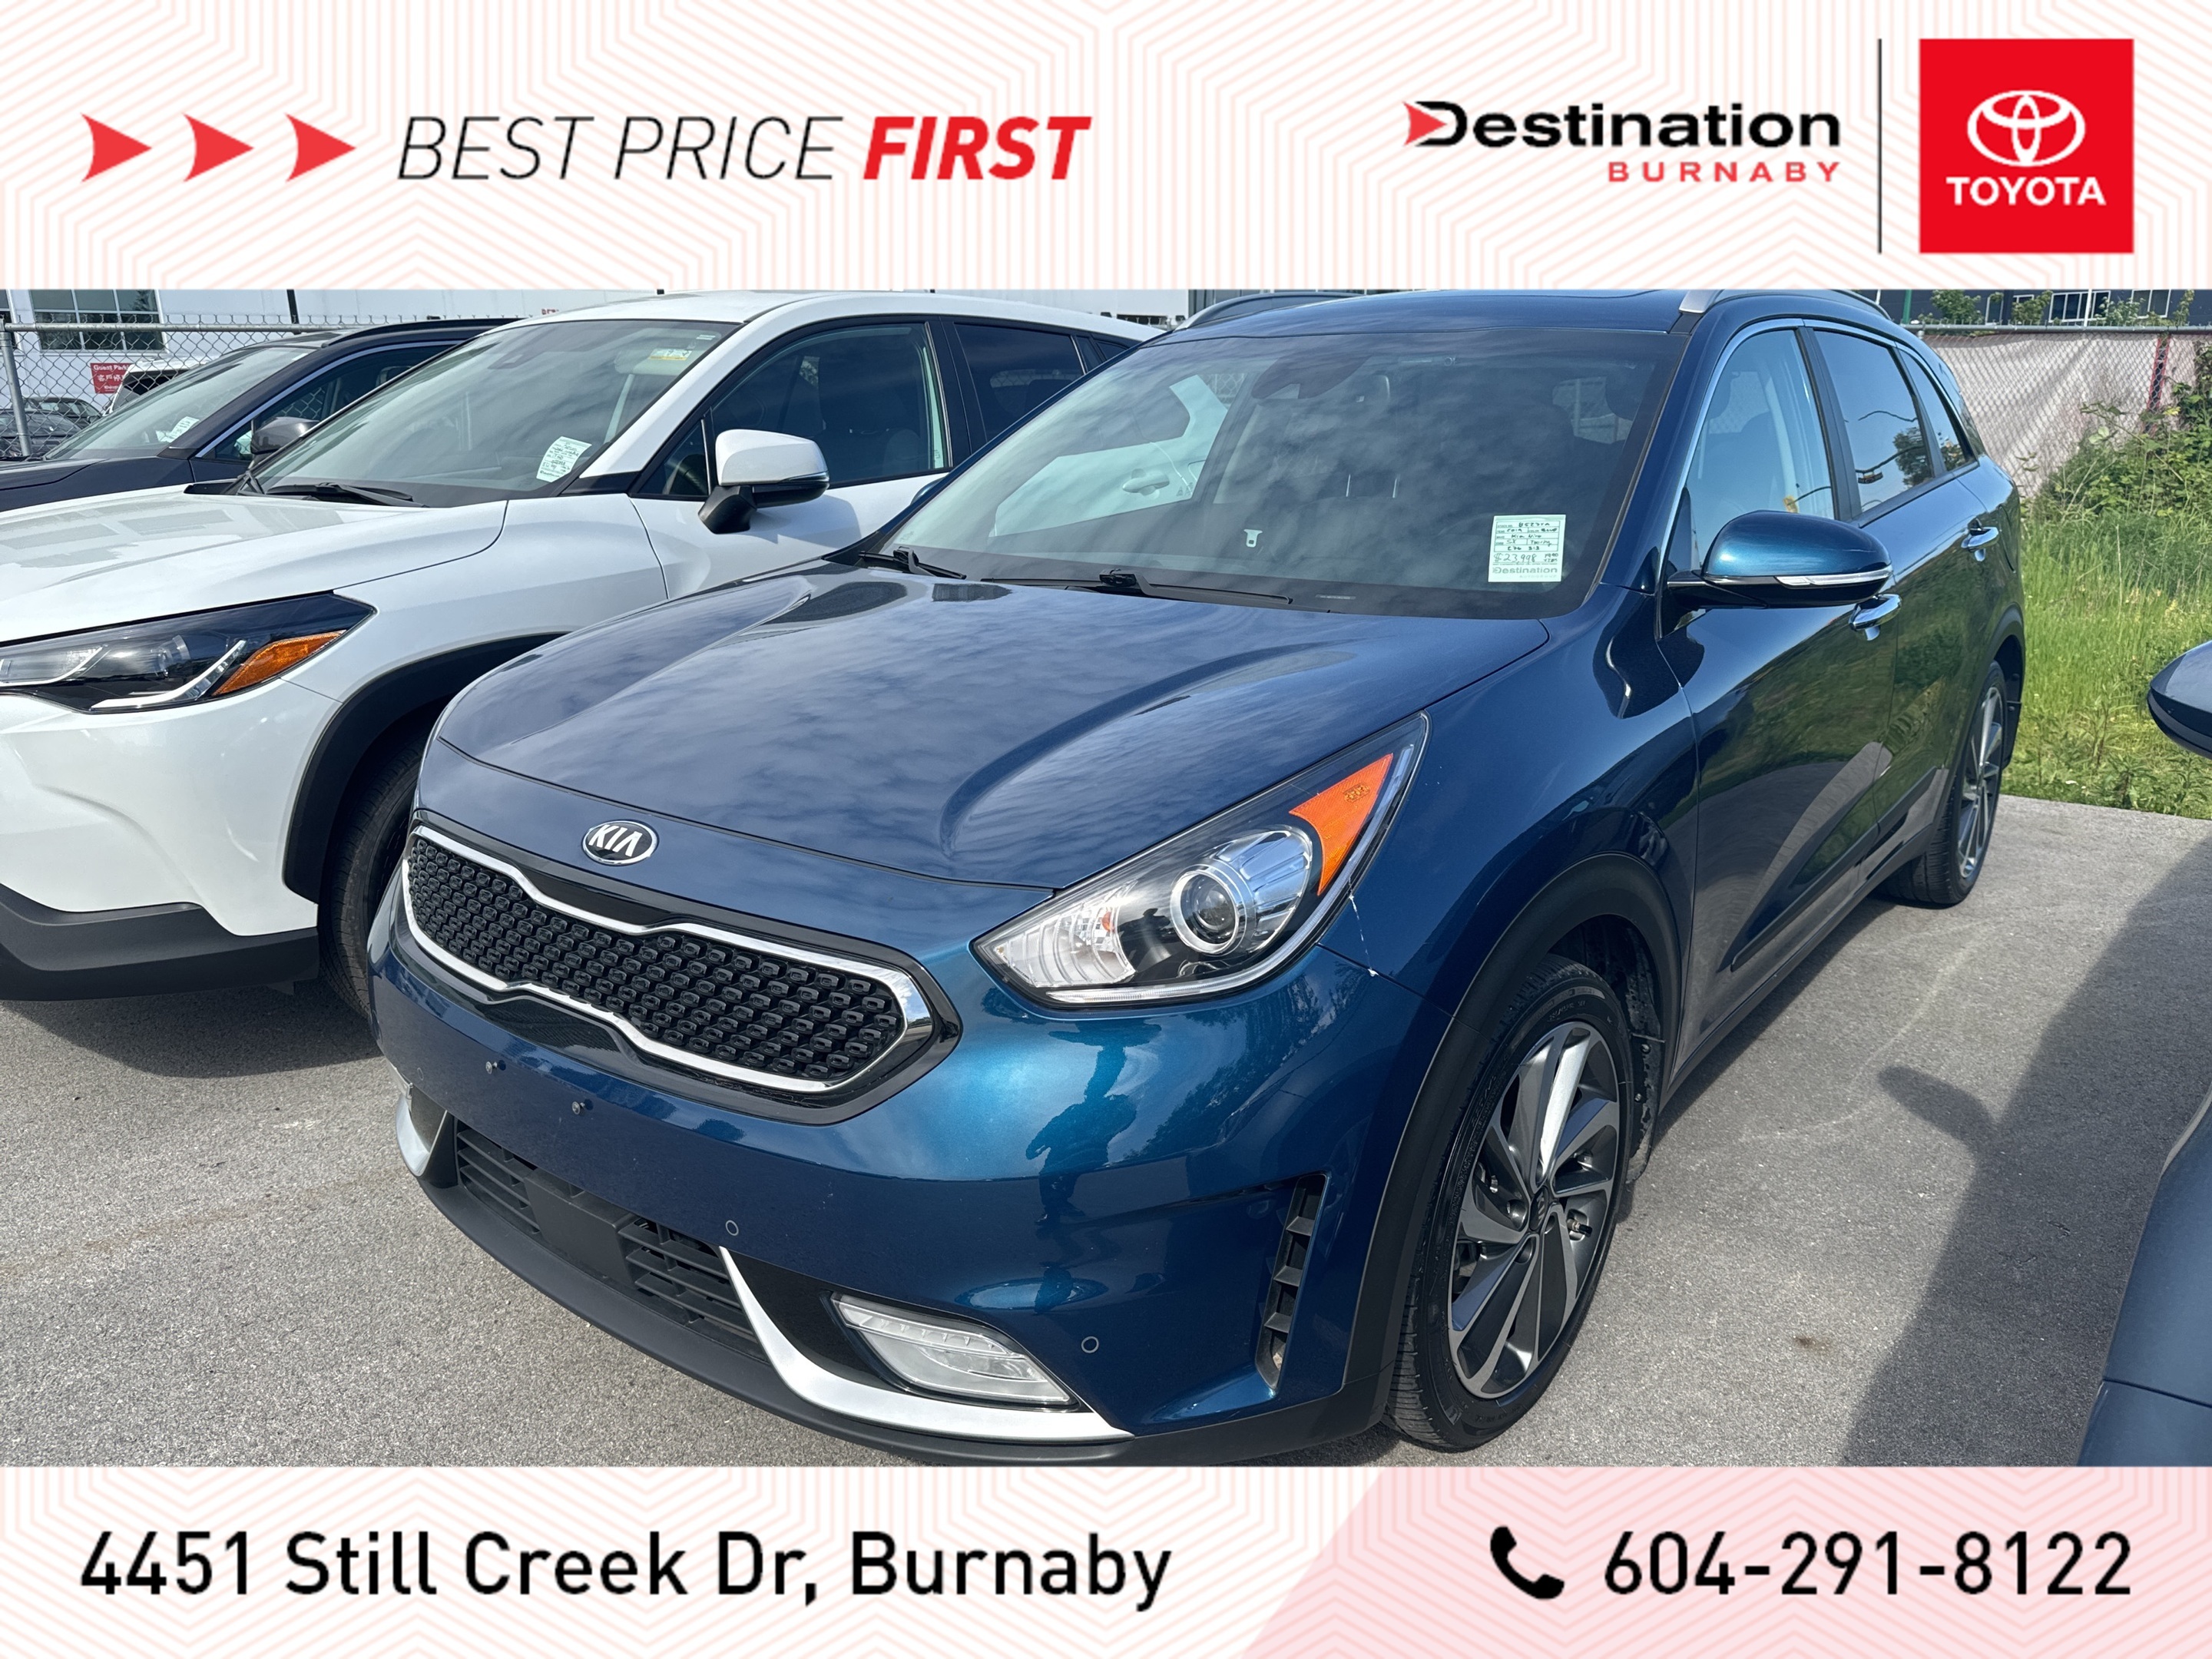 2019 Kia Niro Touring Top Trim! Fully Equipped! No Accidents!